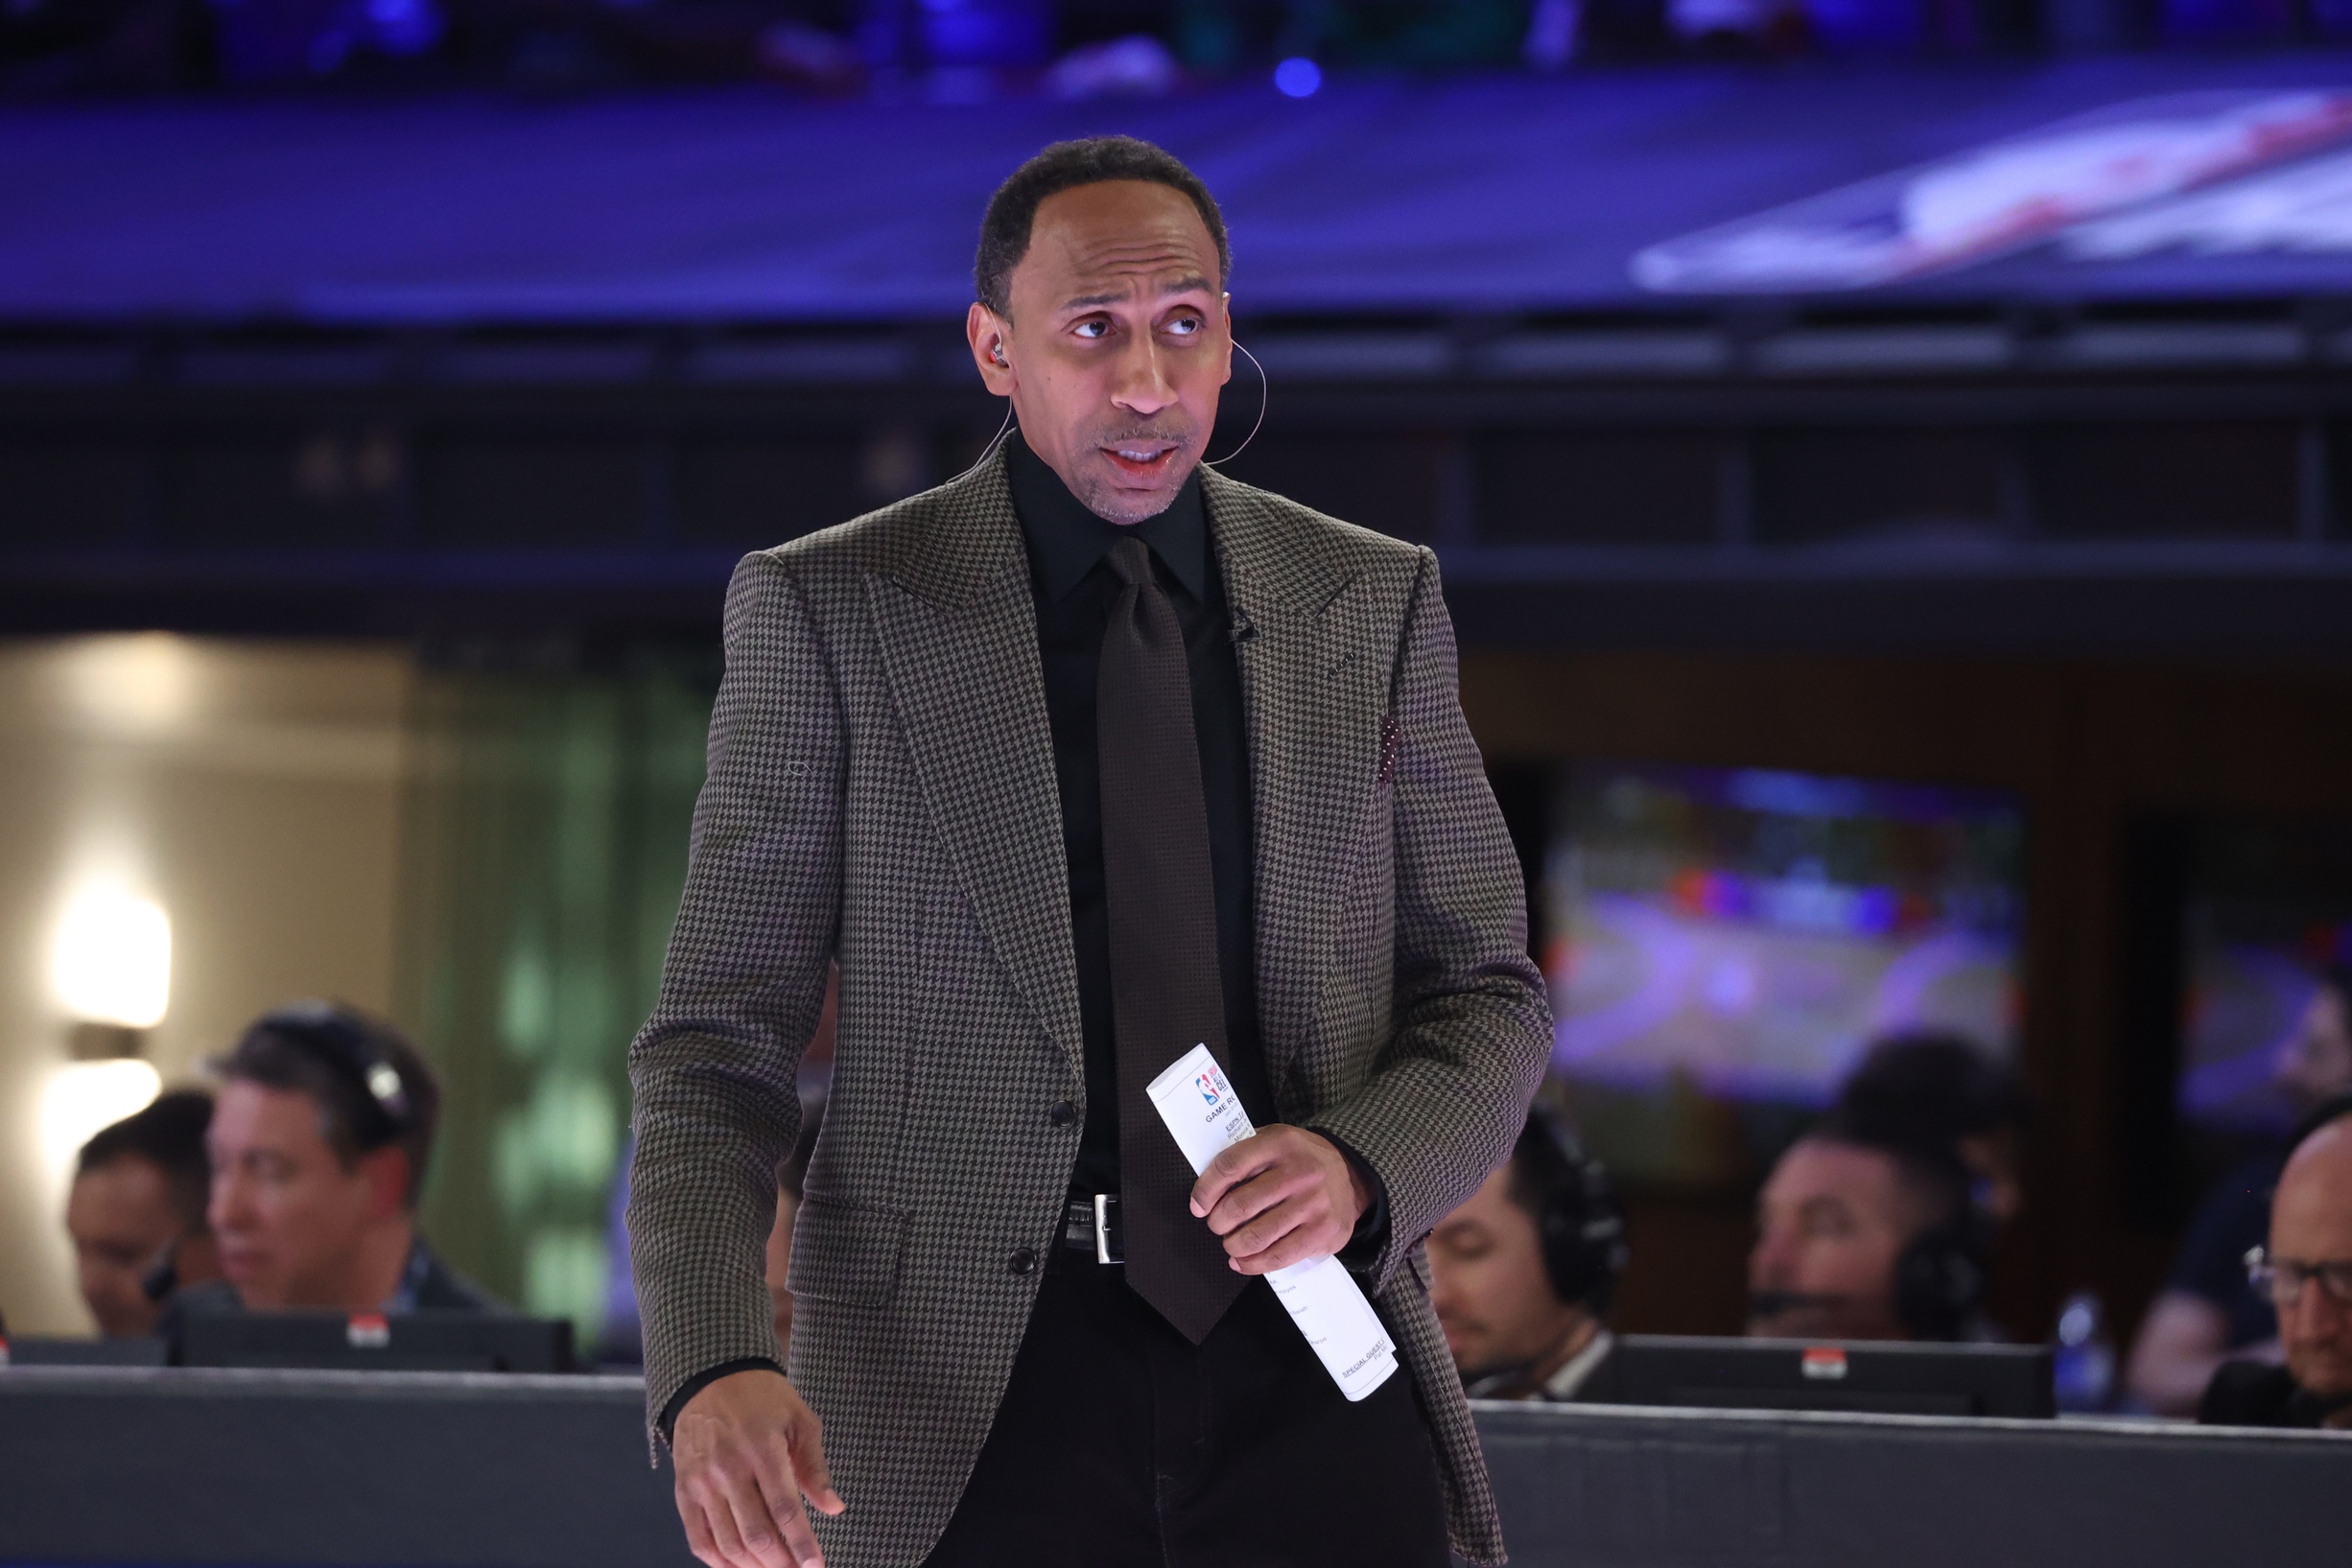 Feb 16, 2024; Indianapolis, IN, USA; Team Stephen A coach Stephen A. Smith looks on against Team Shannon during the All Star Celebrity Game at Lucas Oil Stadium. Mandatory Credit: Trevor Ruszkowski-USA TODAY Sports